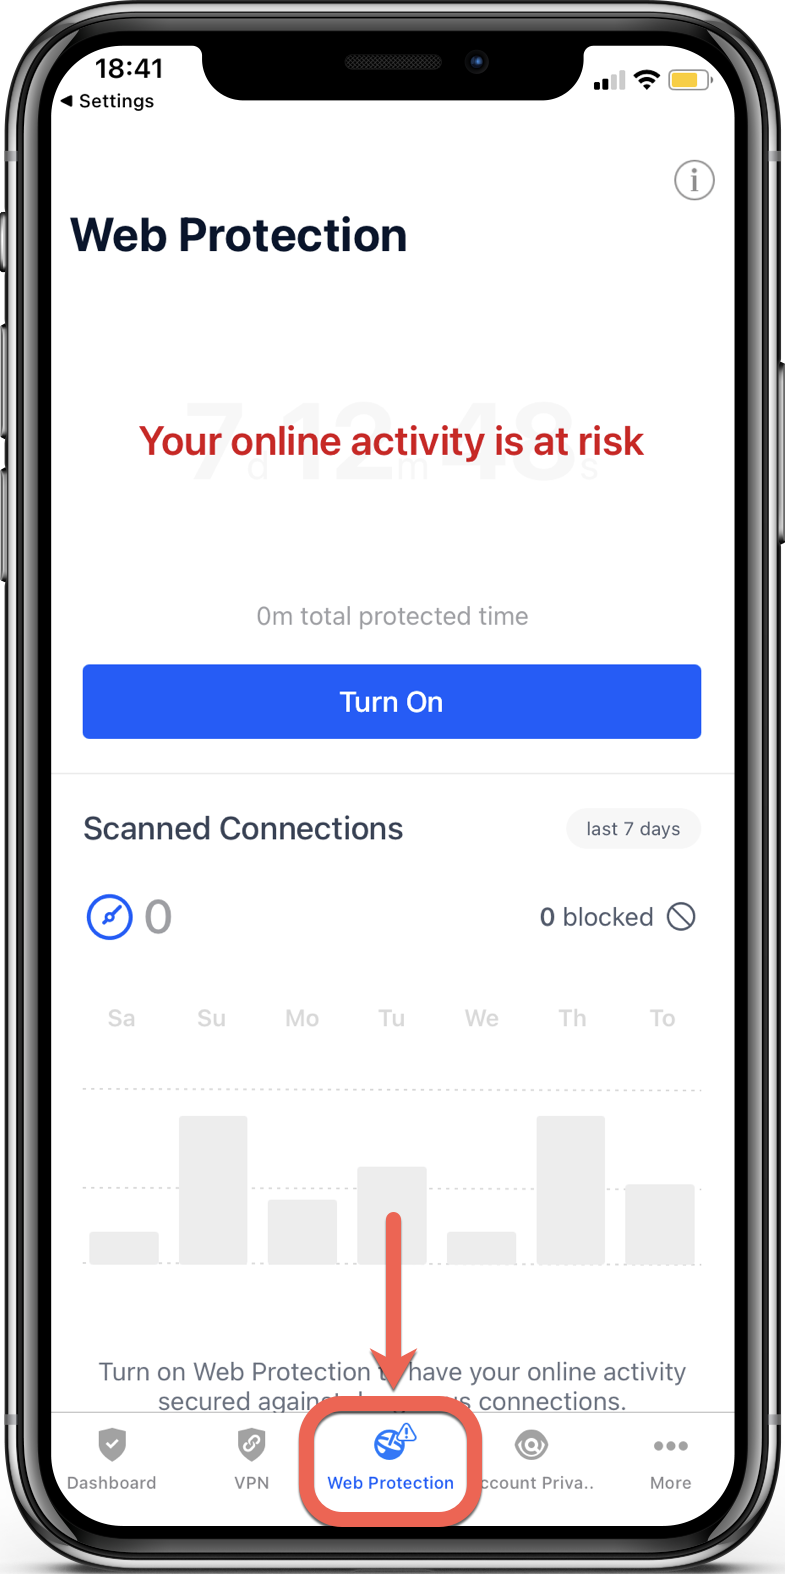 The Web Protection option in Bitdefender Mobile Security for iOS